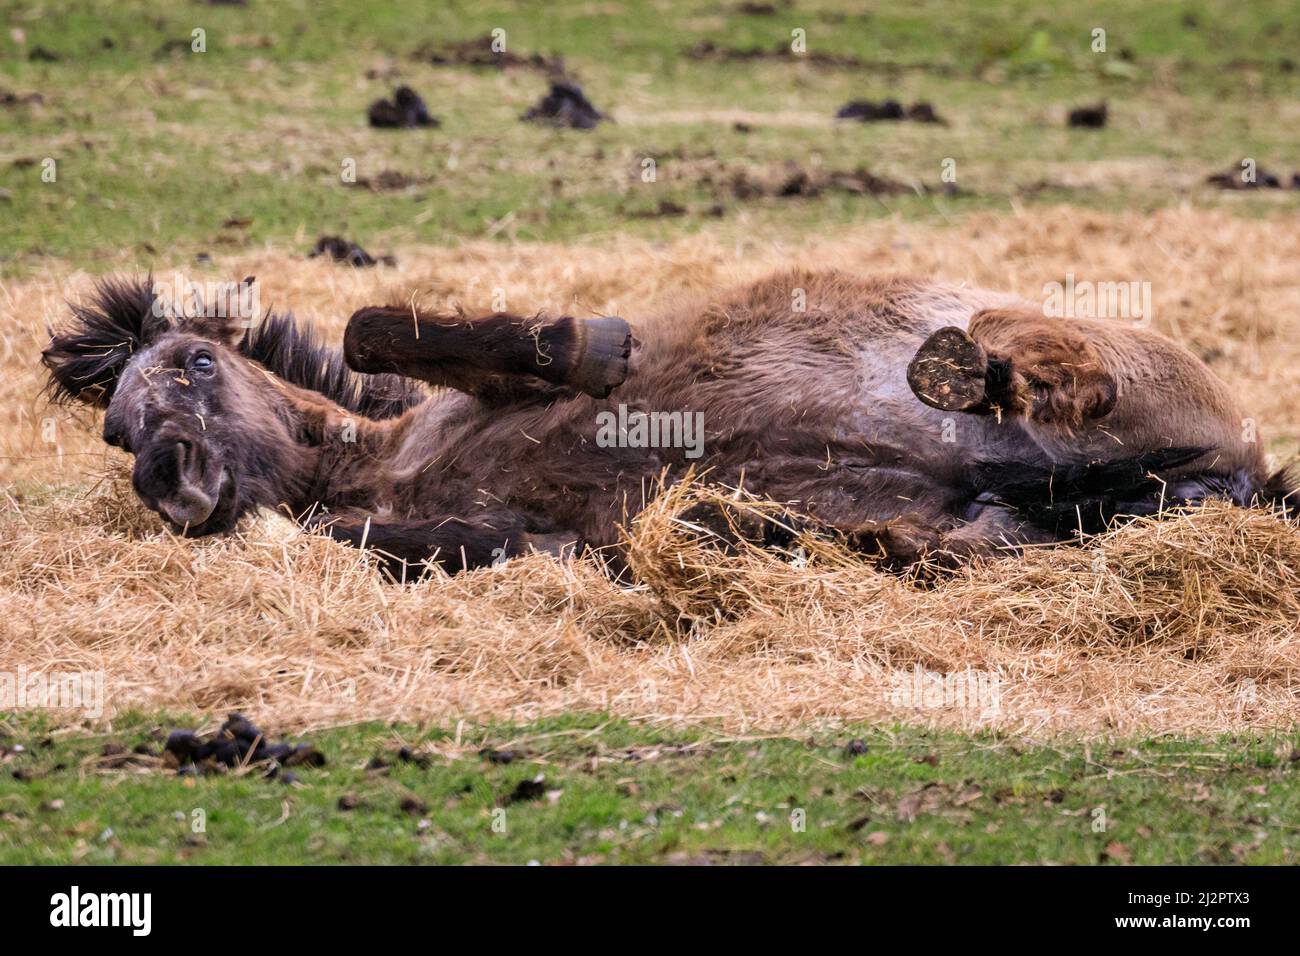 Mehrfelder Bruch, NRW, Germany. 04th Apr, 2022. One of the horses enjoys rolling around in the soft hay feed. A herd of over 300 of of Dülmen Ponies an endangered species and ancient breed, live in feral conditions, but in a protected areas of c. 350 hectares with woods and grassland at Merfelder Bruch Nature Reserve. The herd lives in family clans with very little human interference apart from occasional provision of hay in winter. Credit: Imageplotter/Alamy Live News Stock Photo